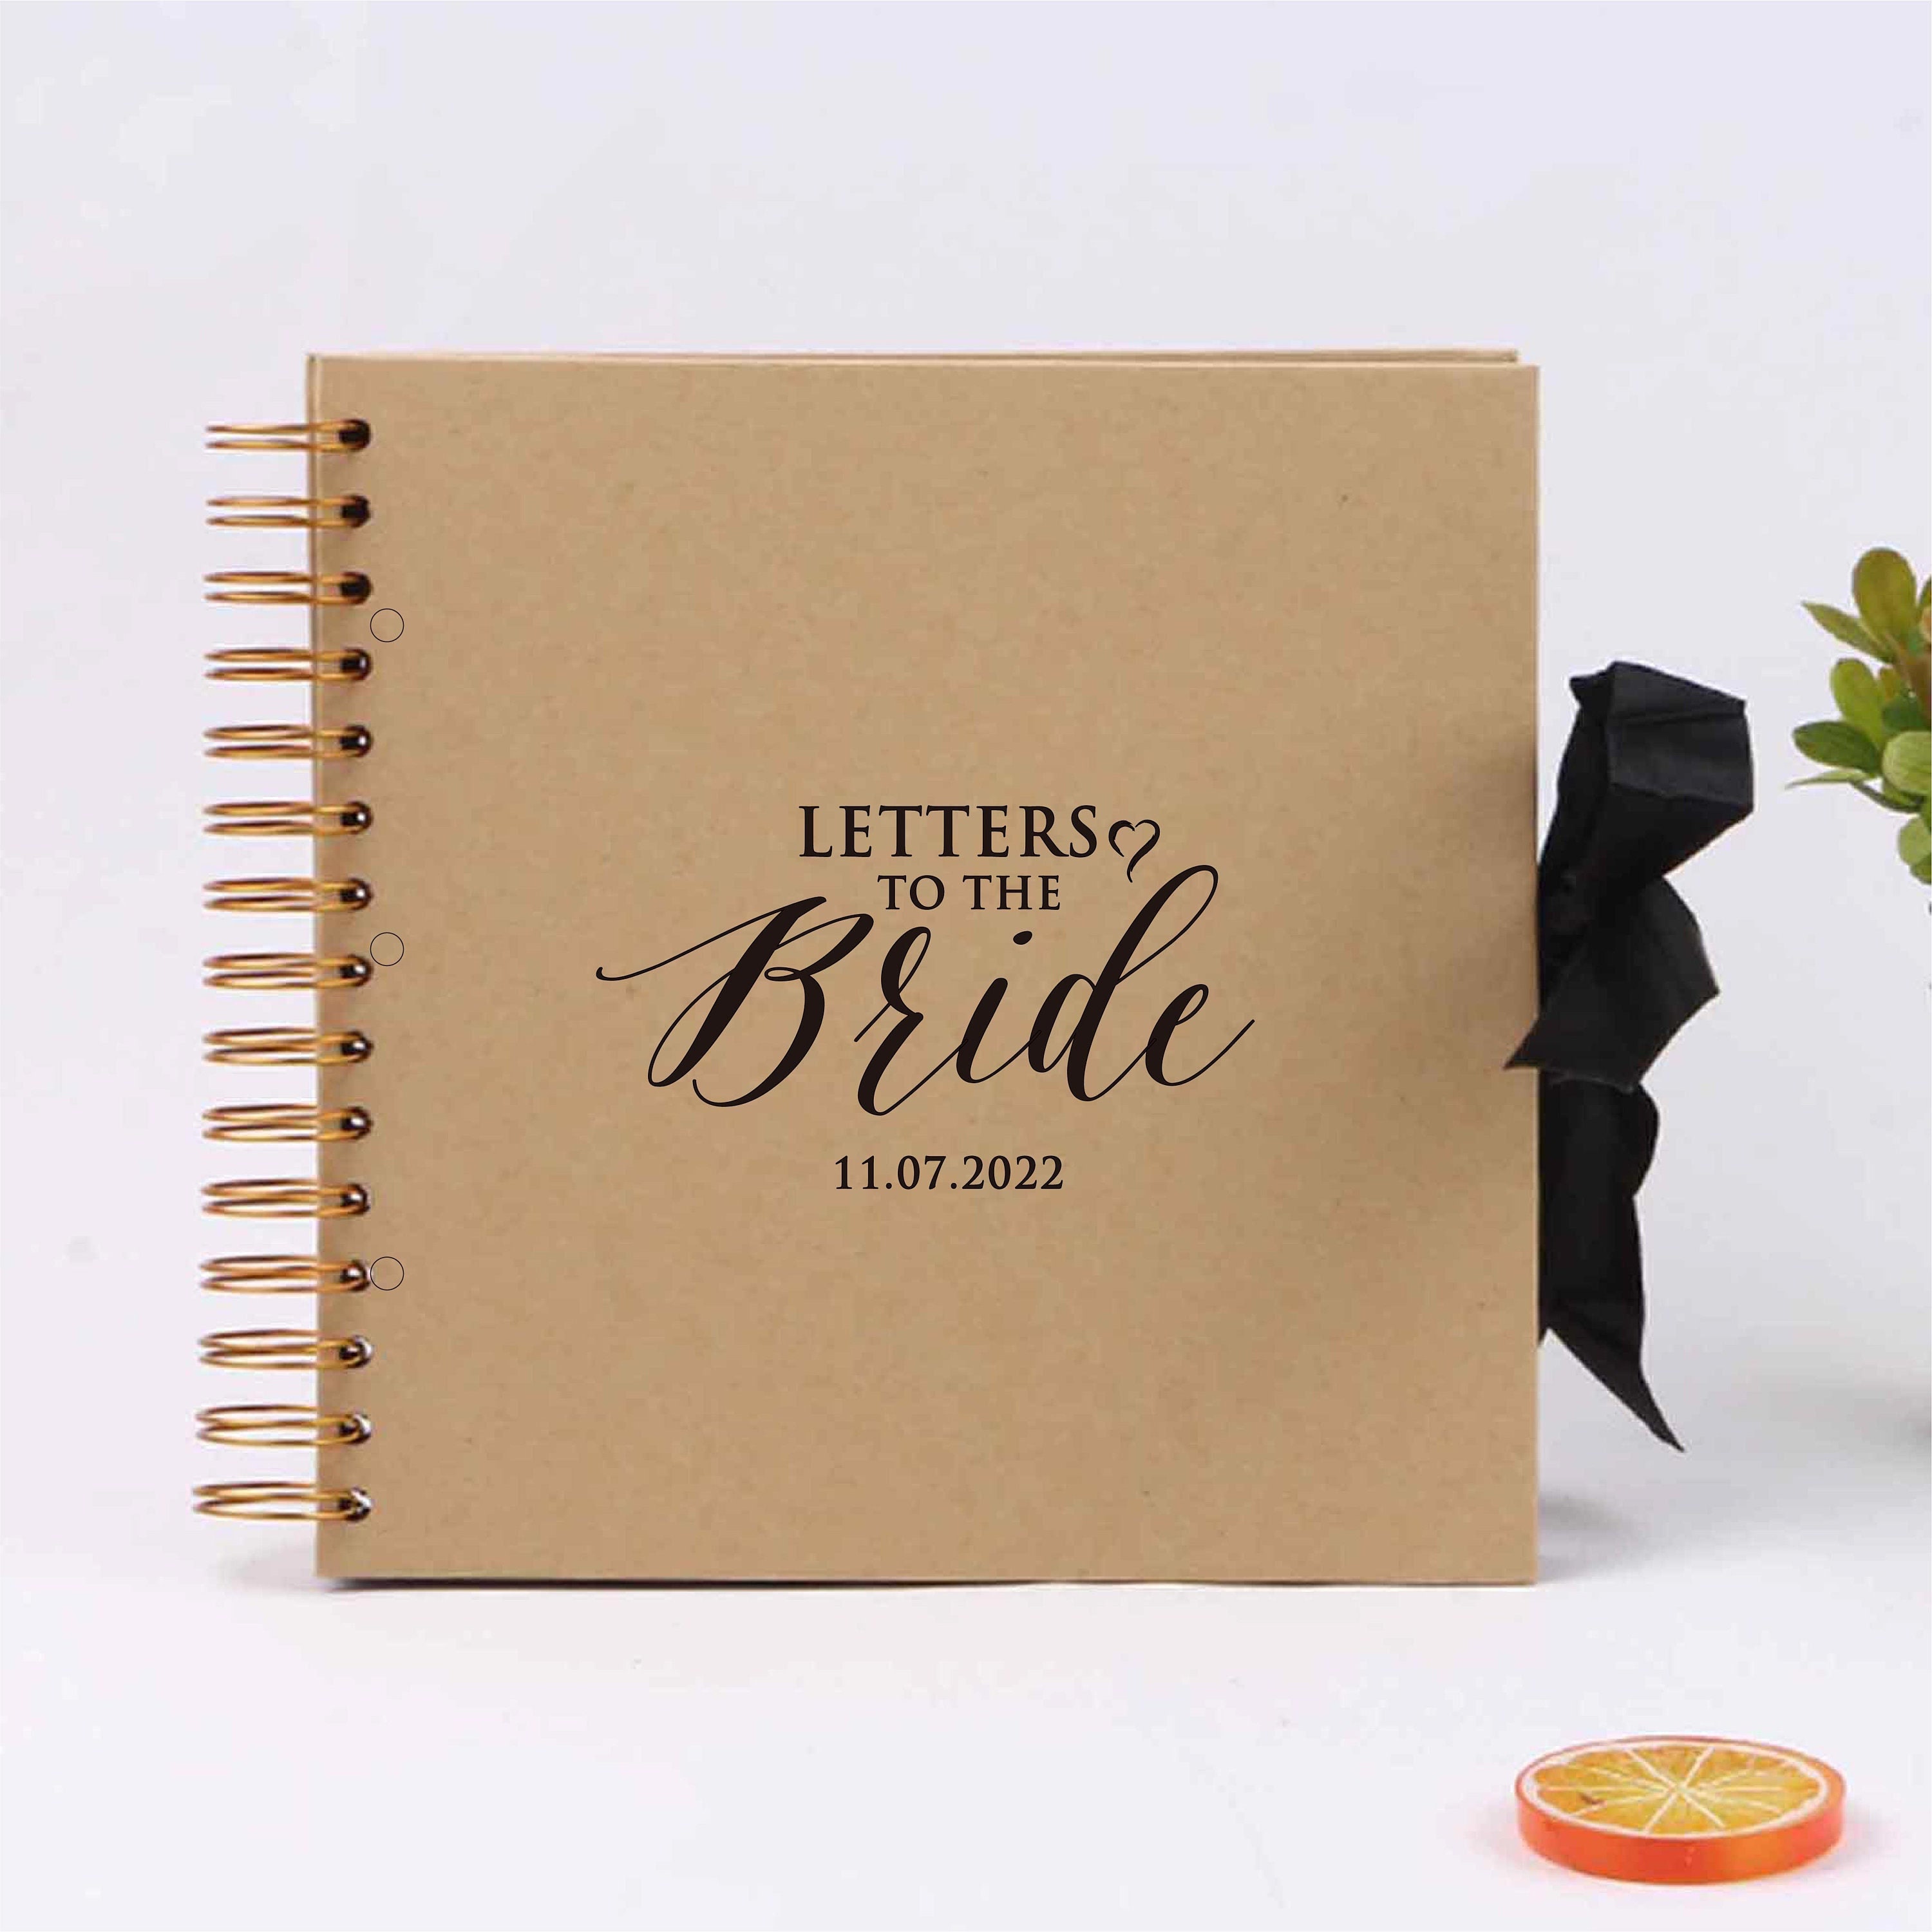 This is your sign to make a Letters to the Bride scrapbook! Made